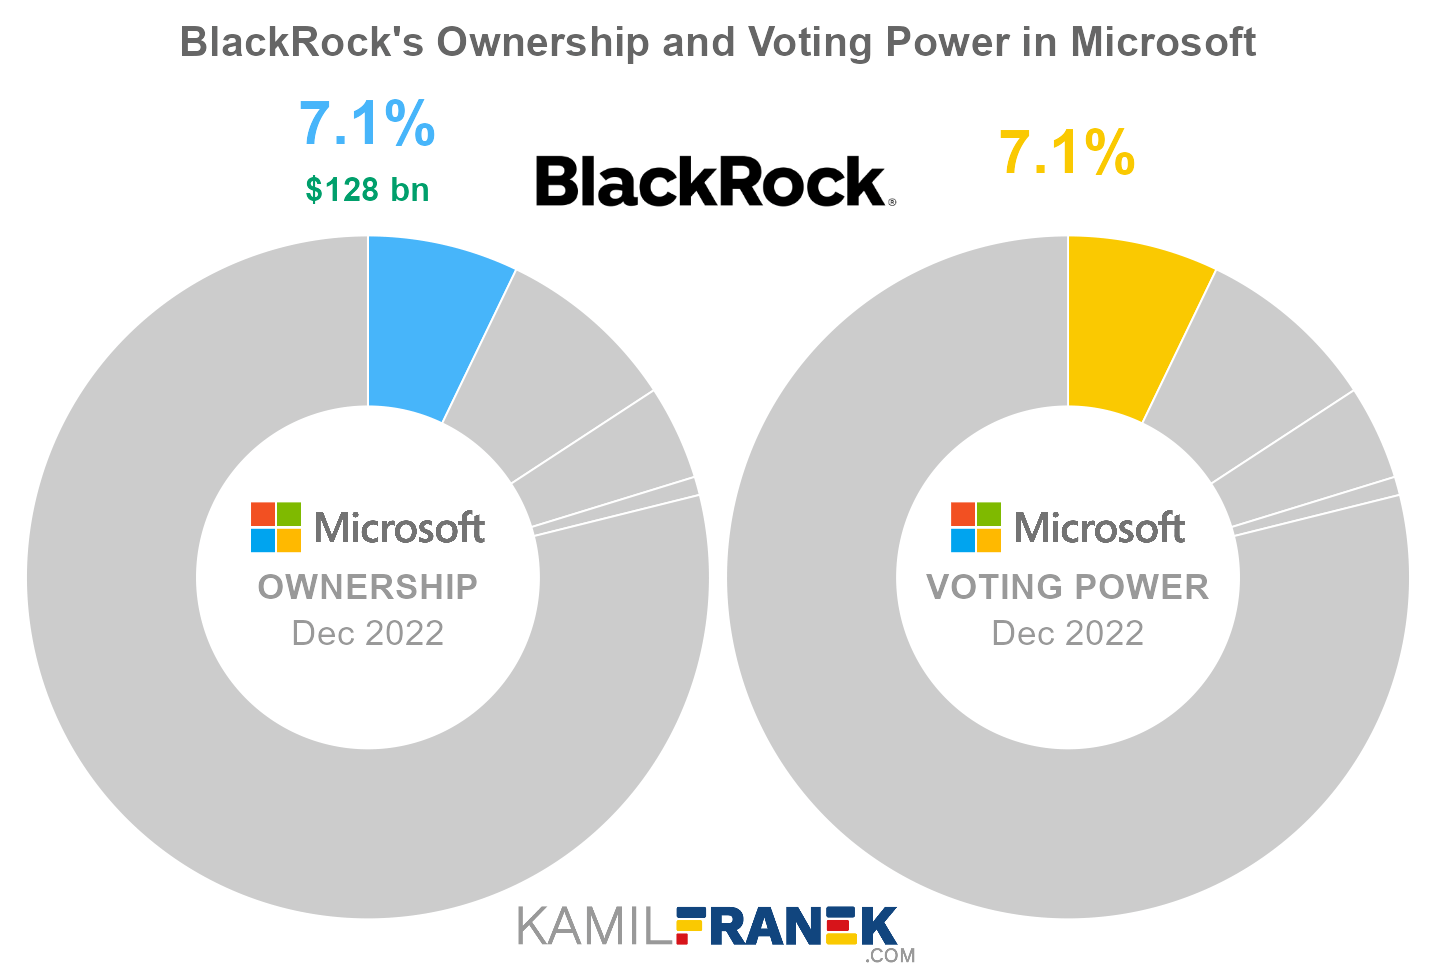 BlackRock's share ownership and voting power in Microsoft (chart)